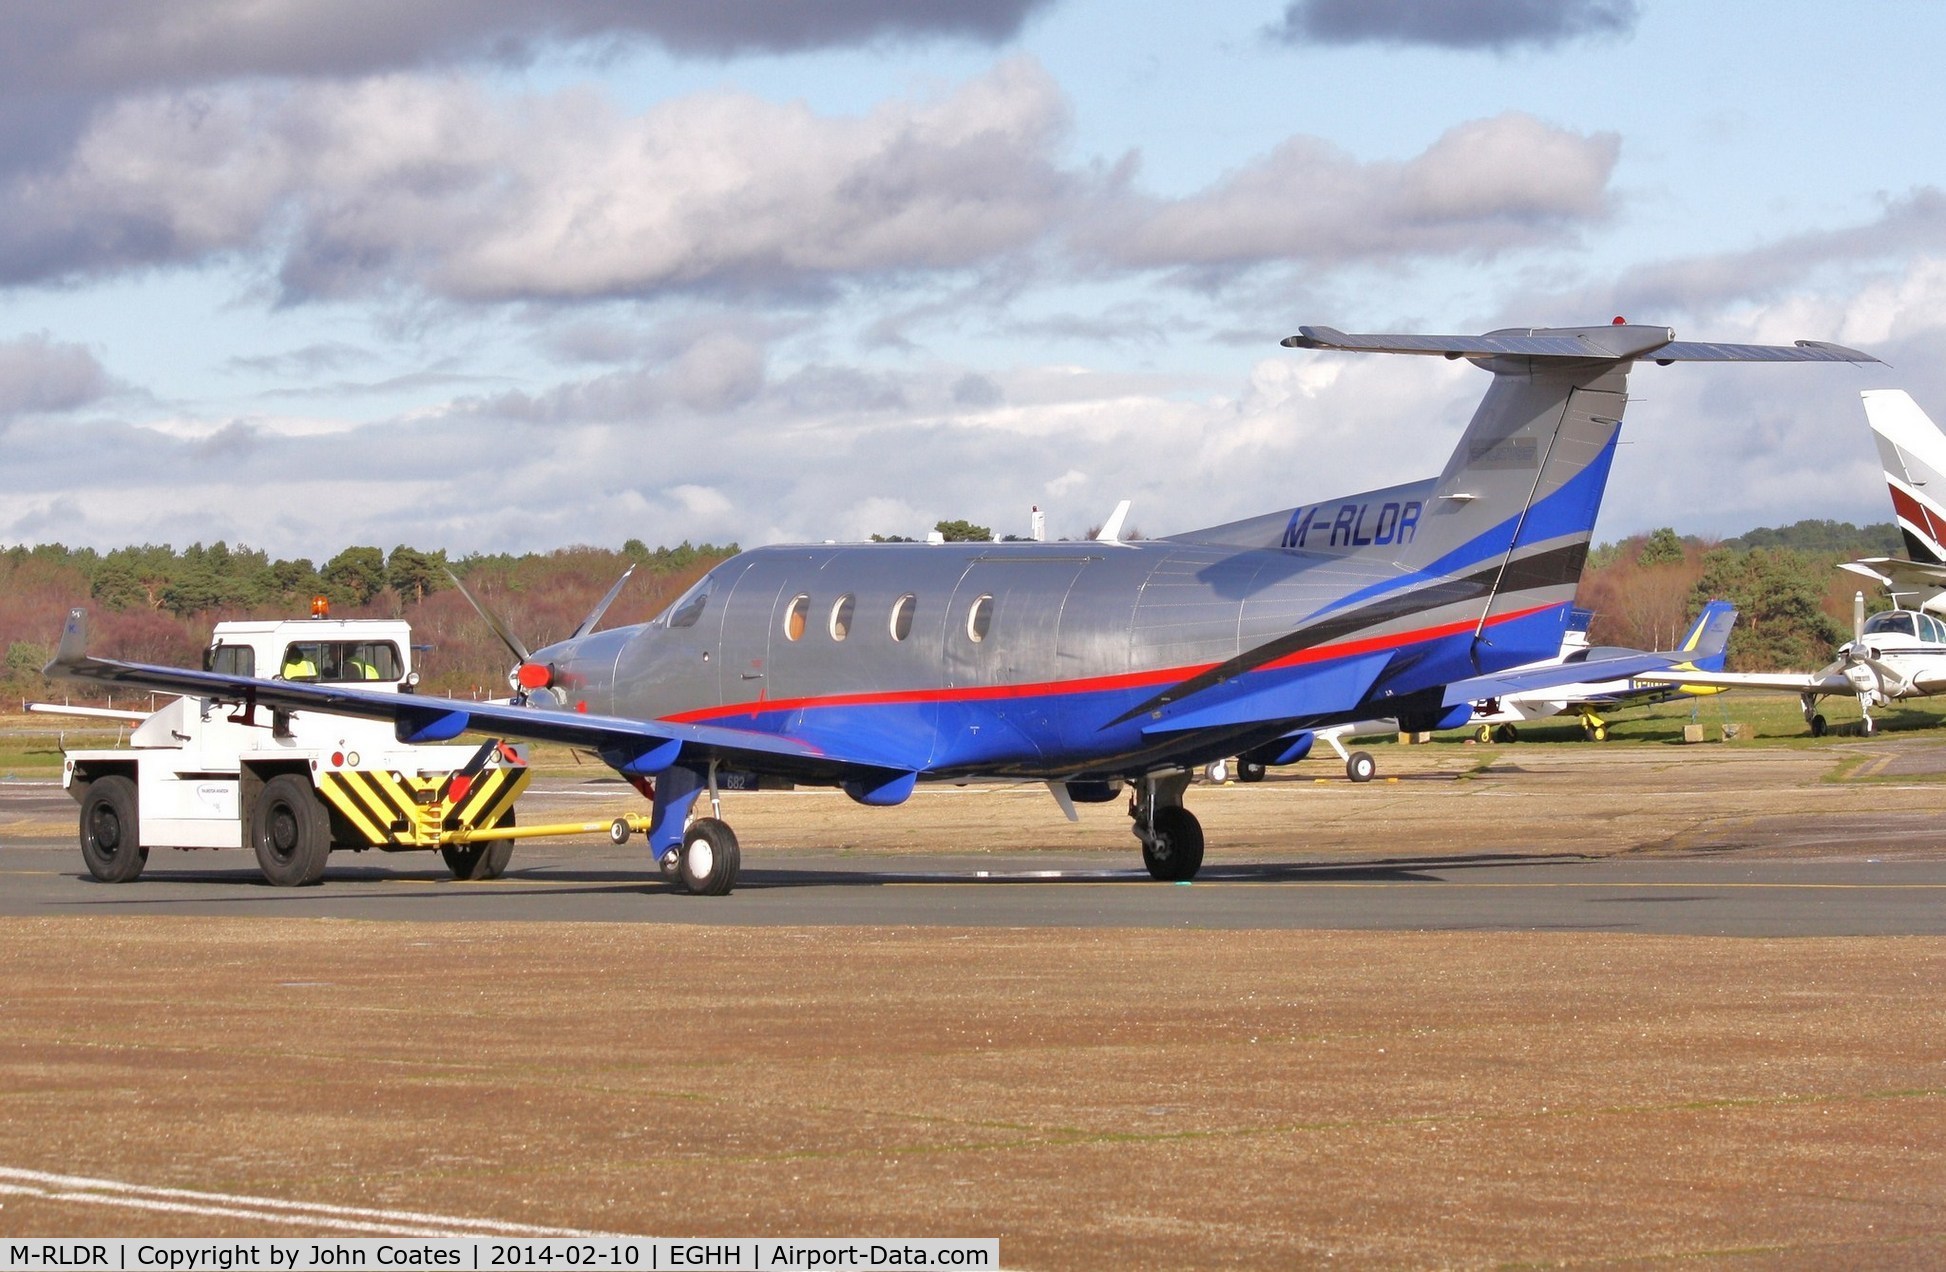 M-RLDR, 2005 Pilatus PC-12/45 C/N 682, Being towed past Airtime North